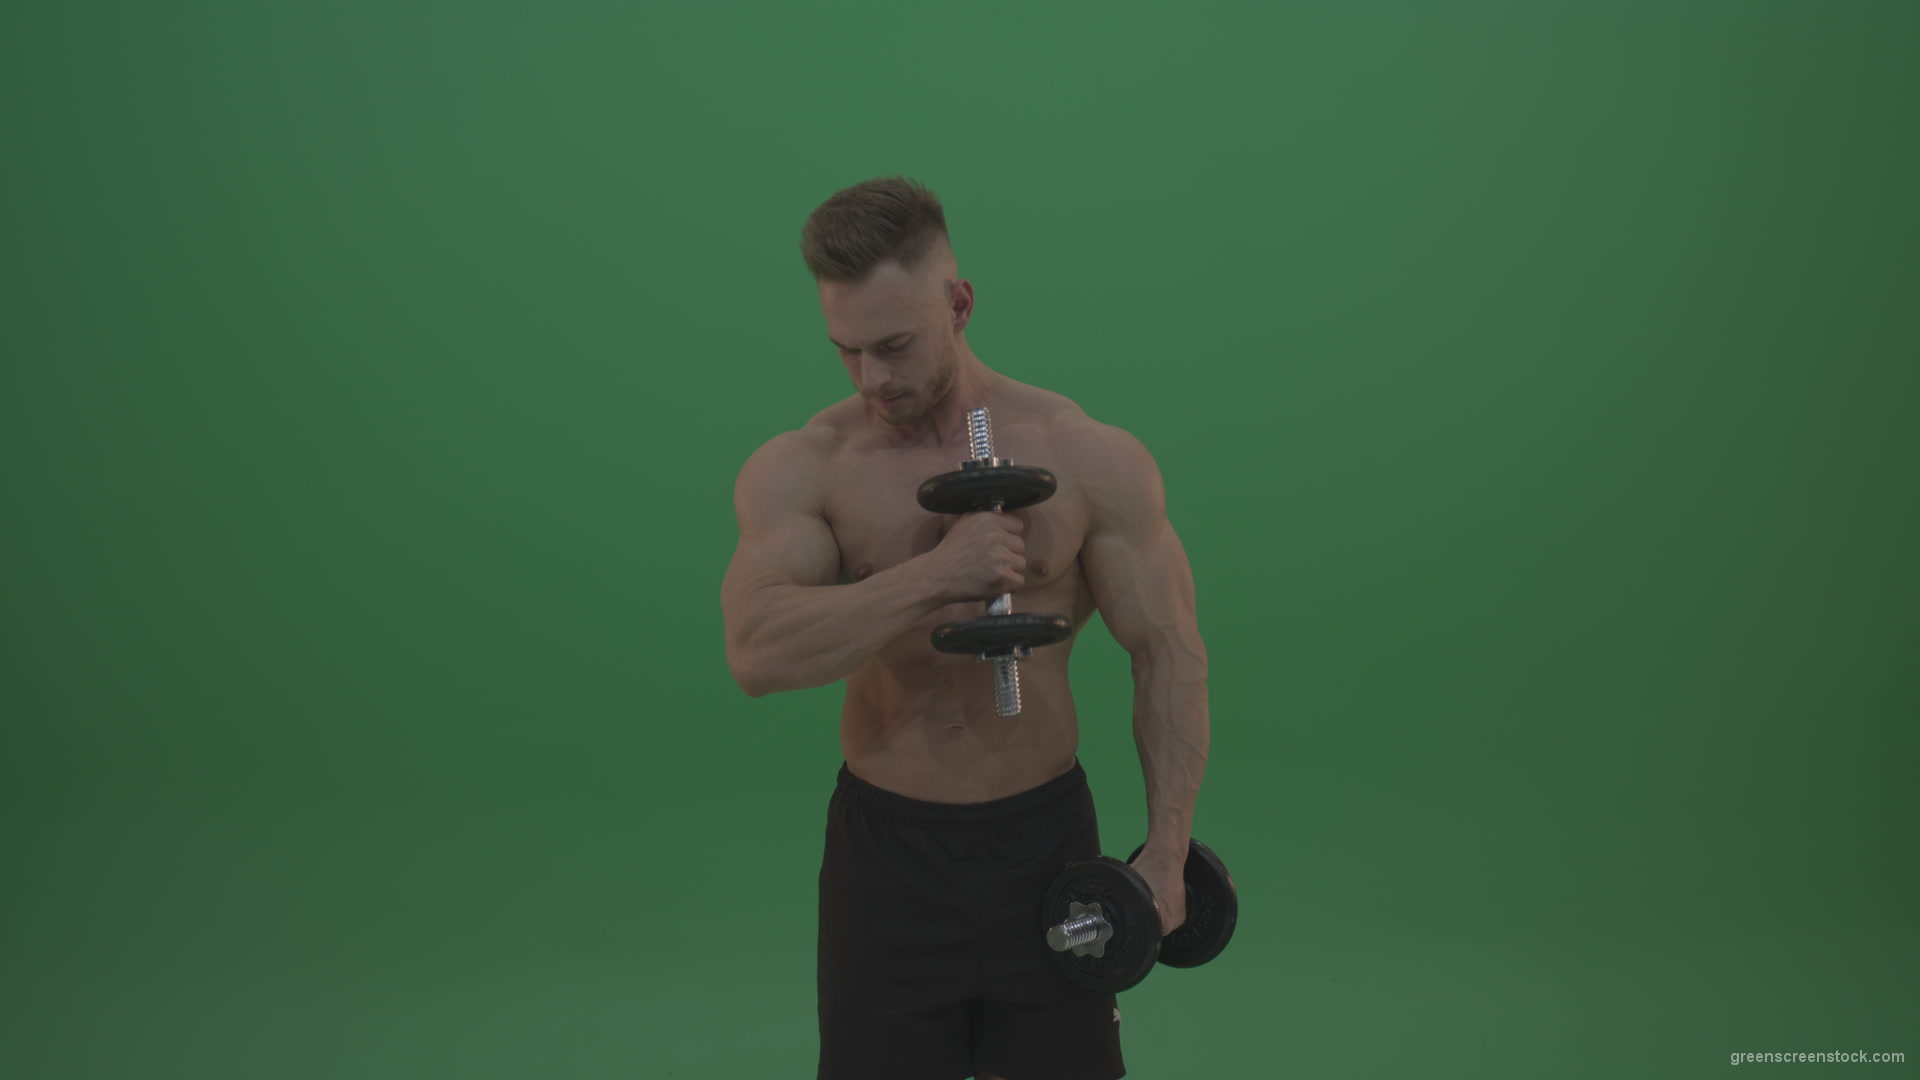 Young_Bodybuilder_Working_Out_With_Two_Handed_Dumbbell_Biceps_Exercises_On_Green_Screen_Wall_Background_009 Green Screen Stock